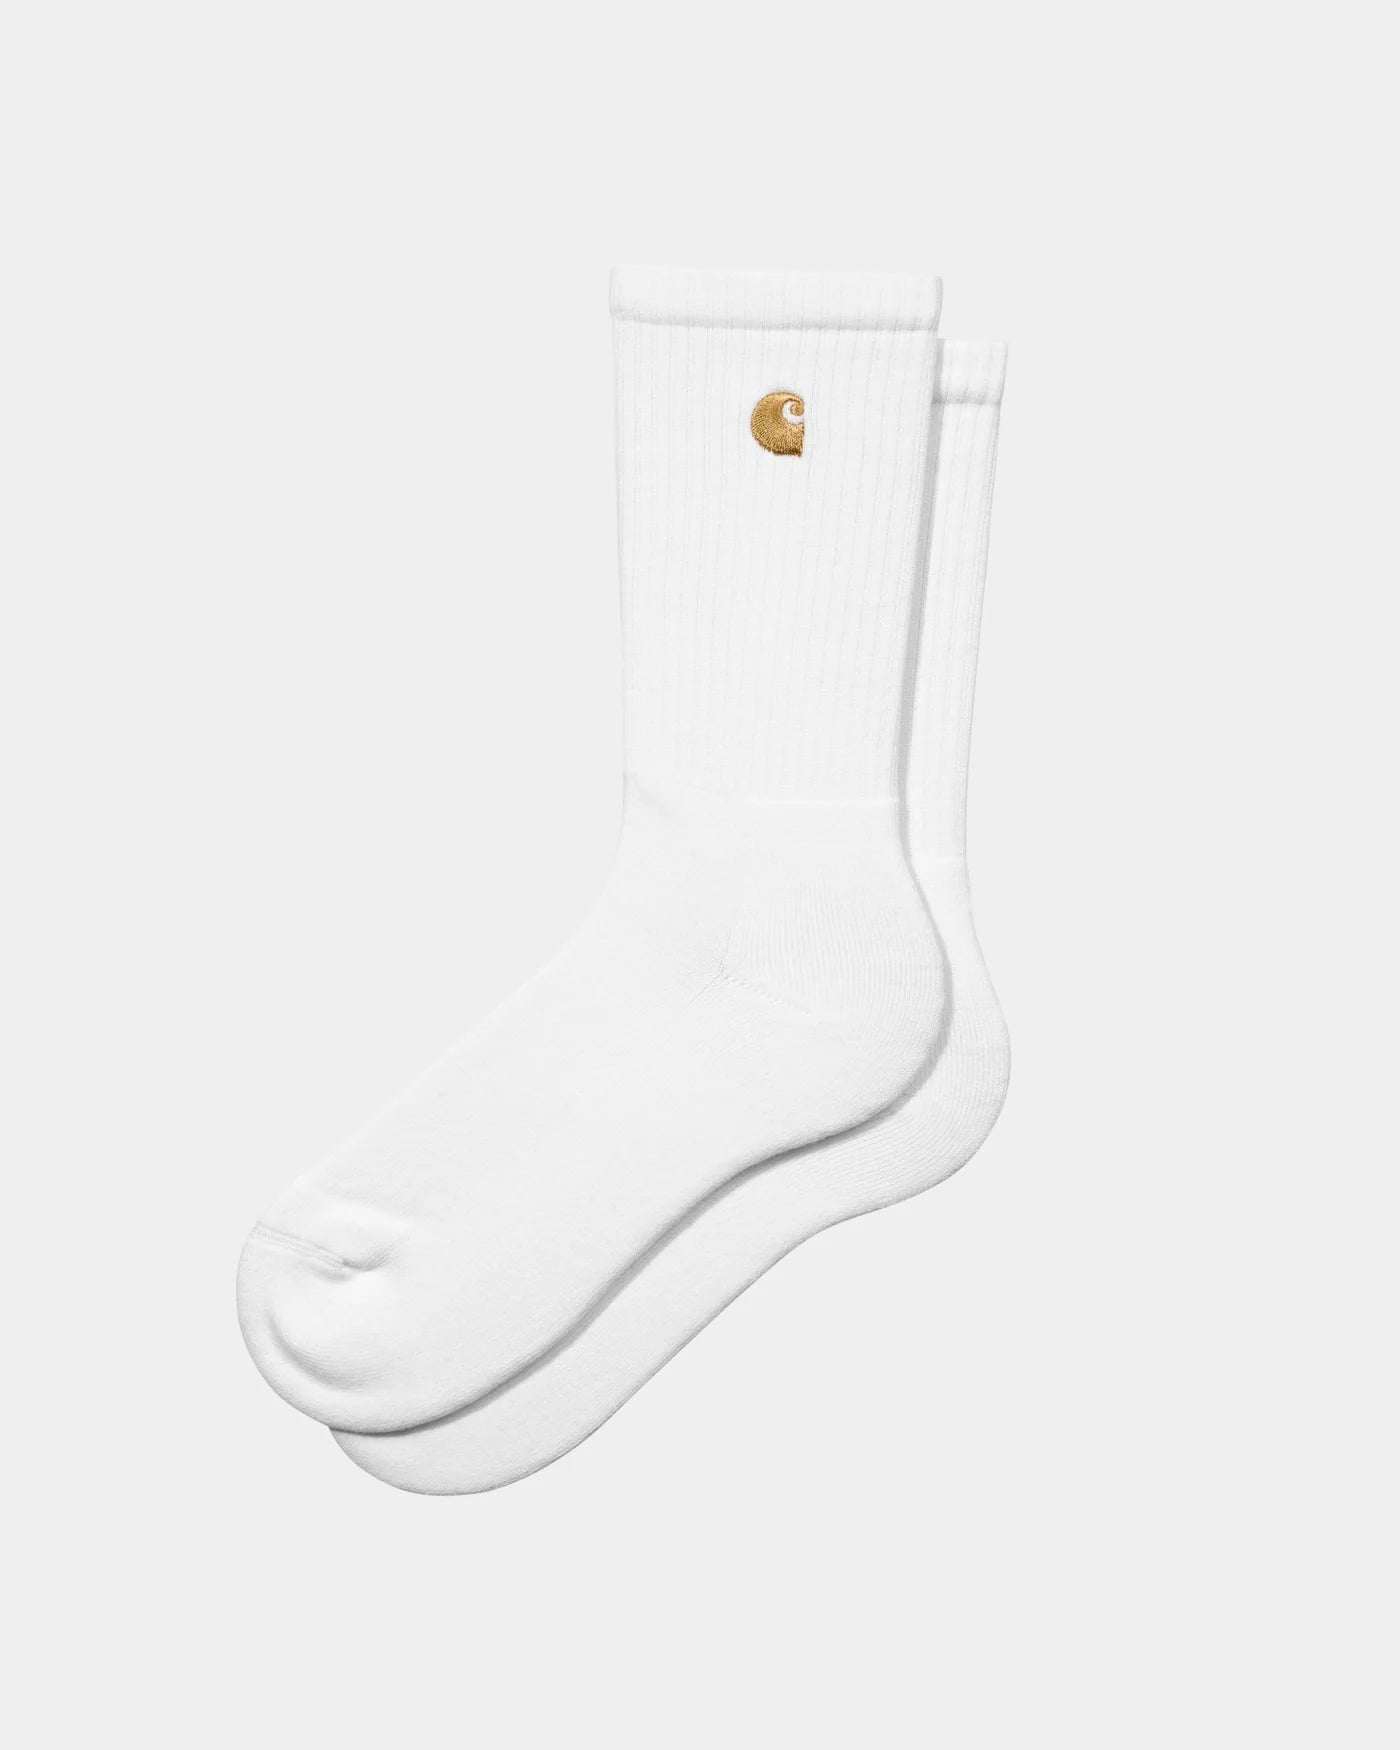 Carhartt WIP Chase Socks: Assorted Colors